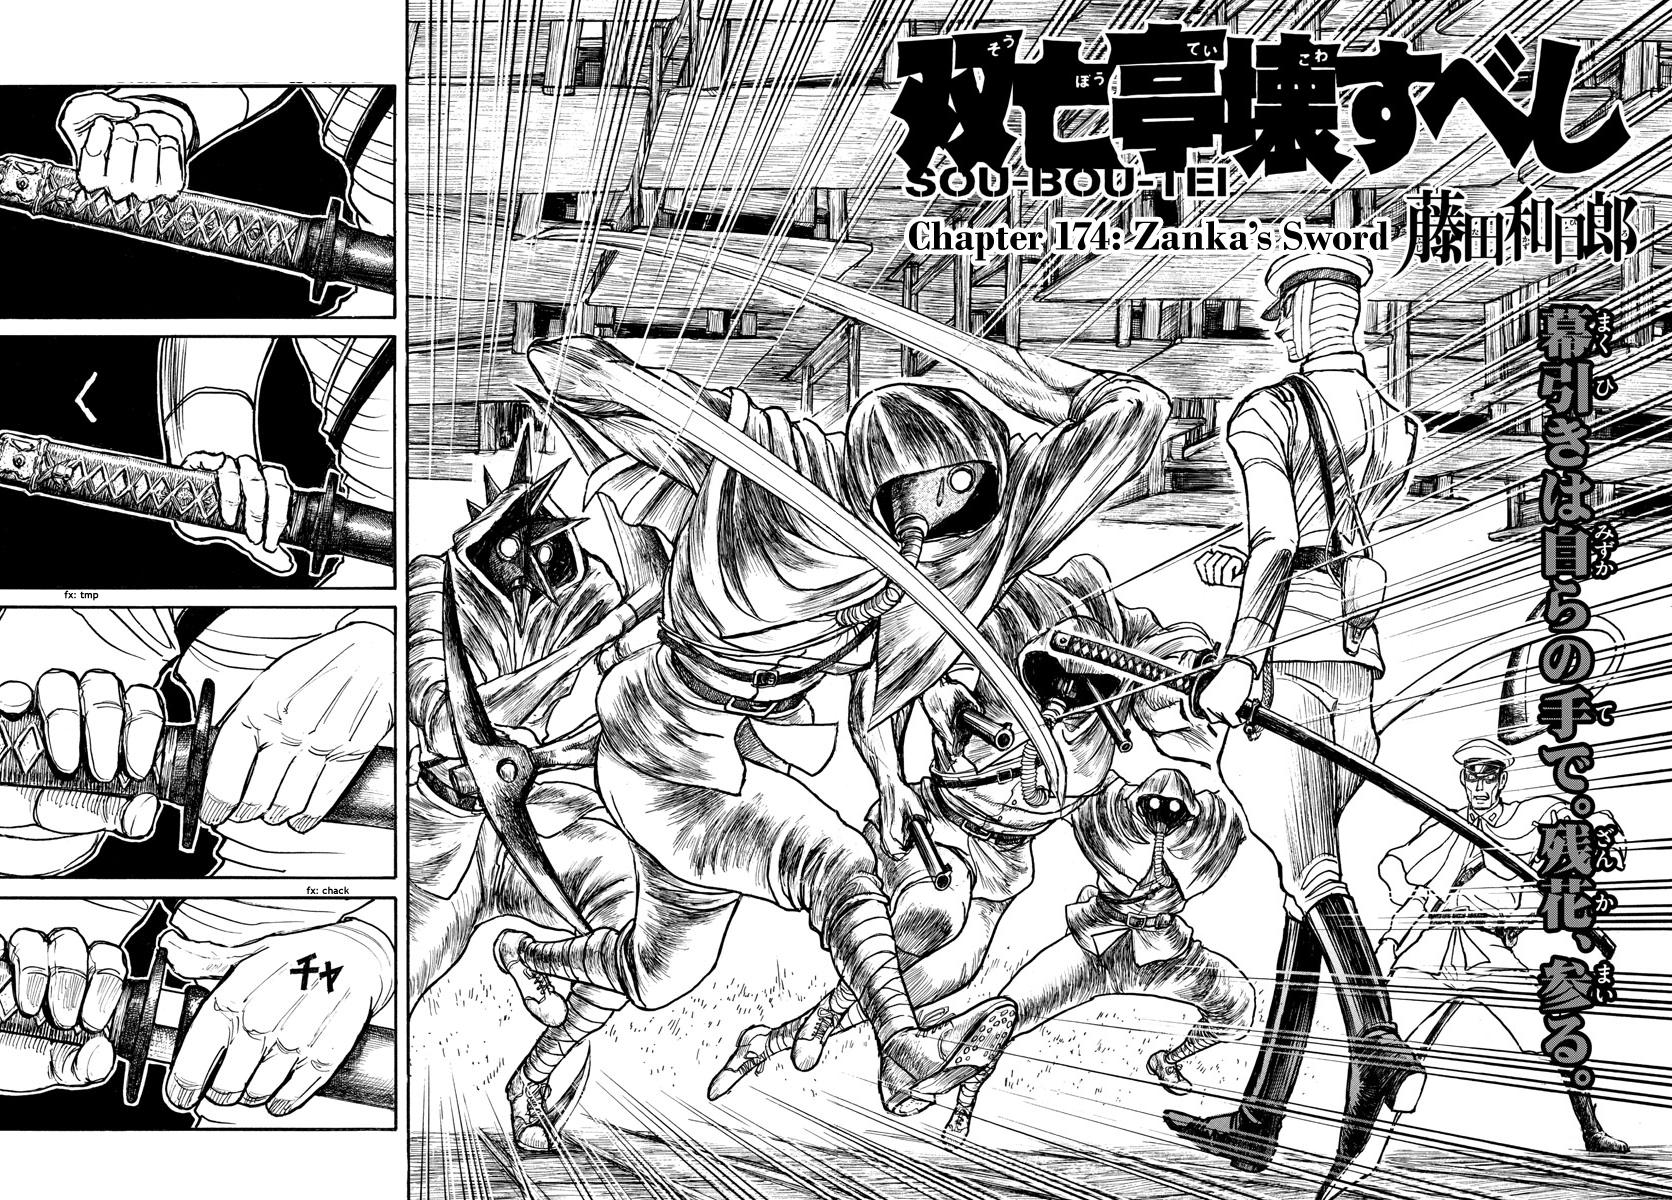 Souboutei Must Be Destroyed Vol.18 Chapter 174: Zanka's Sword - Picture 2